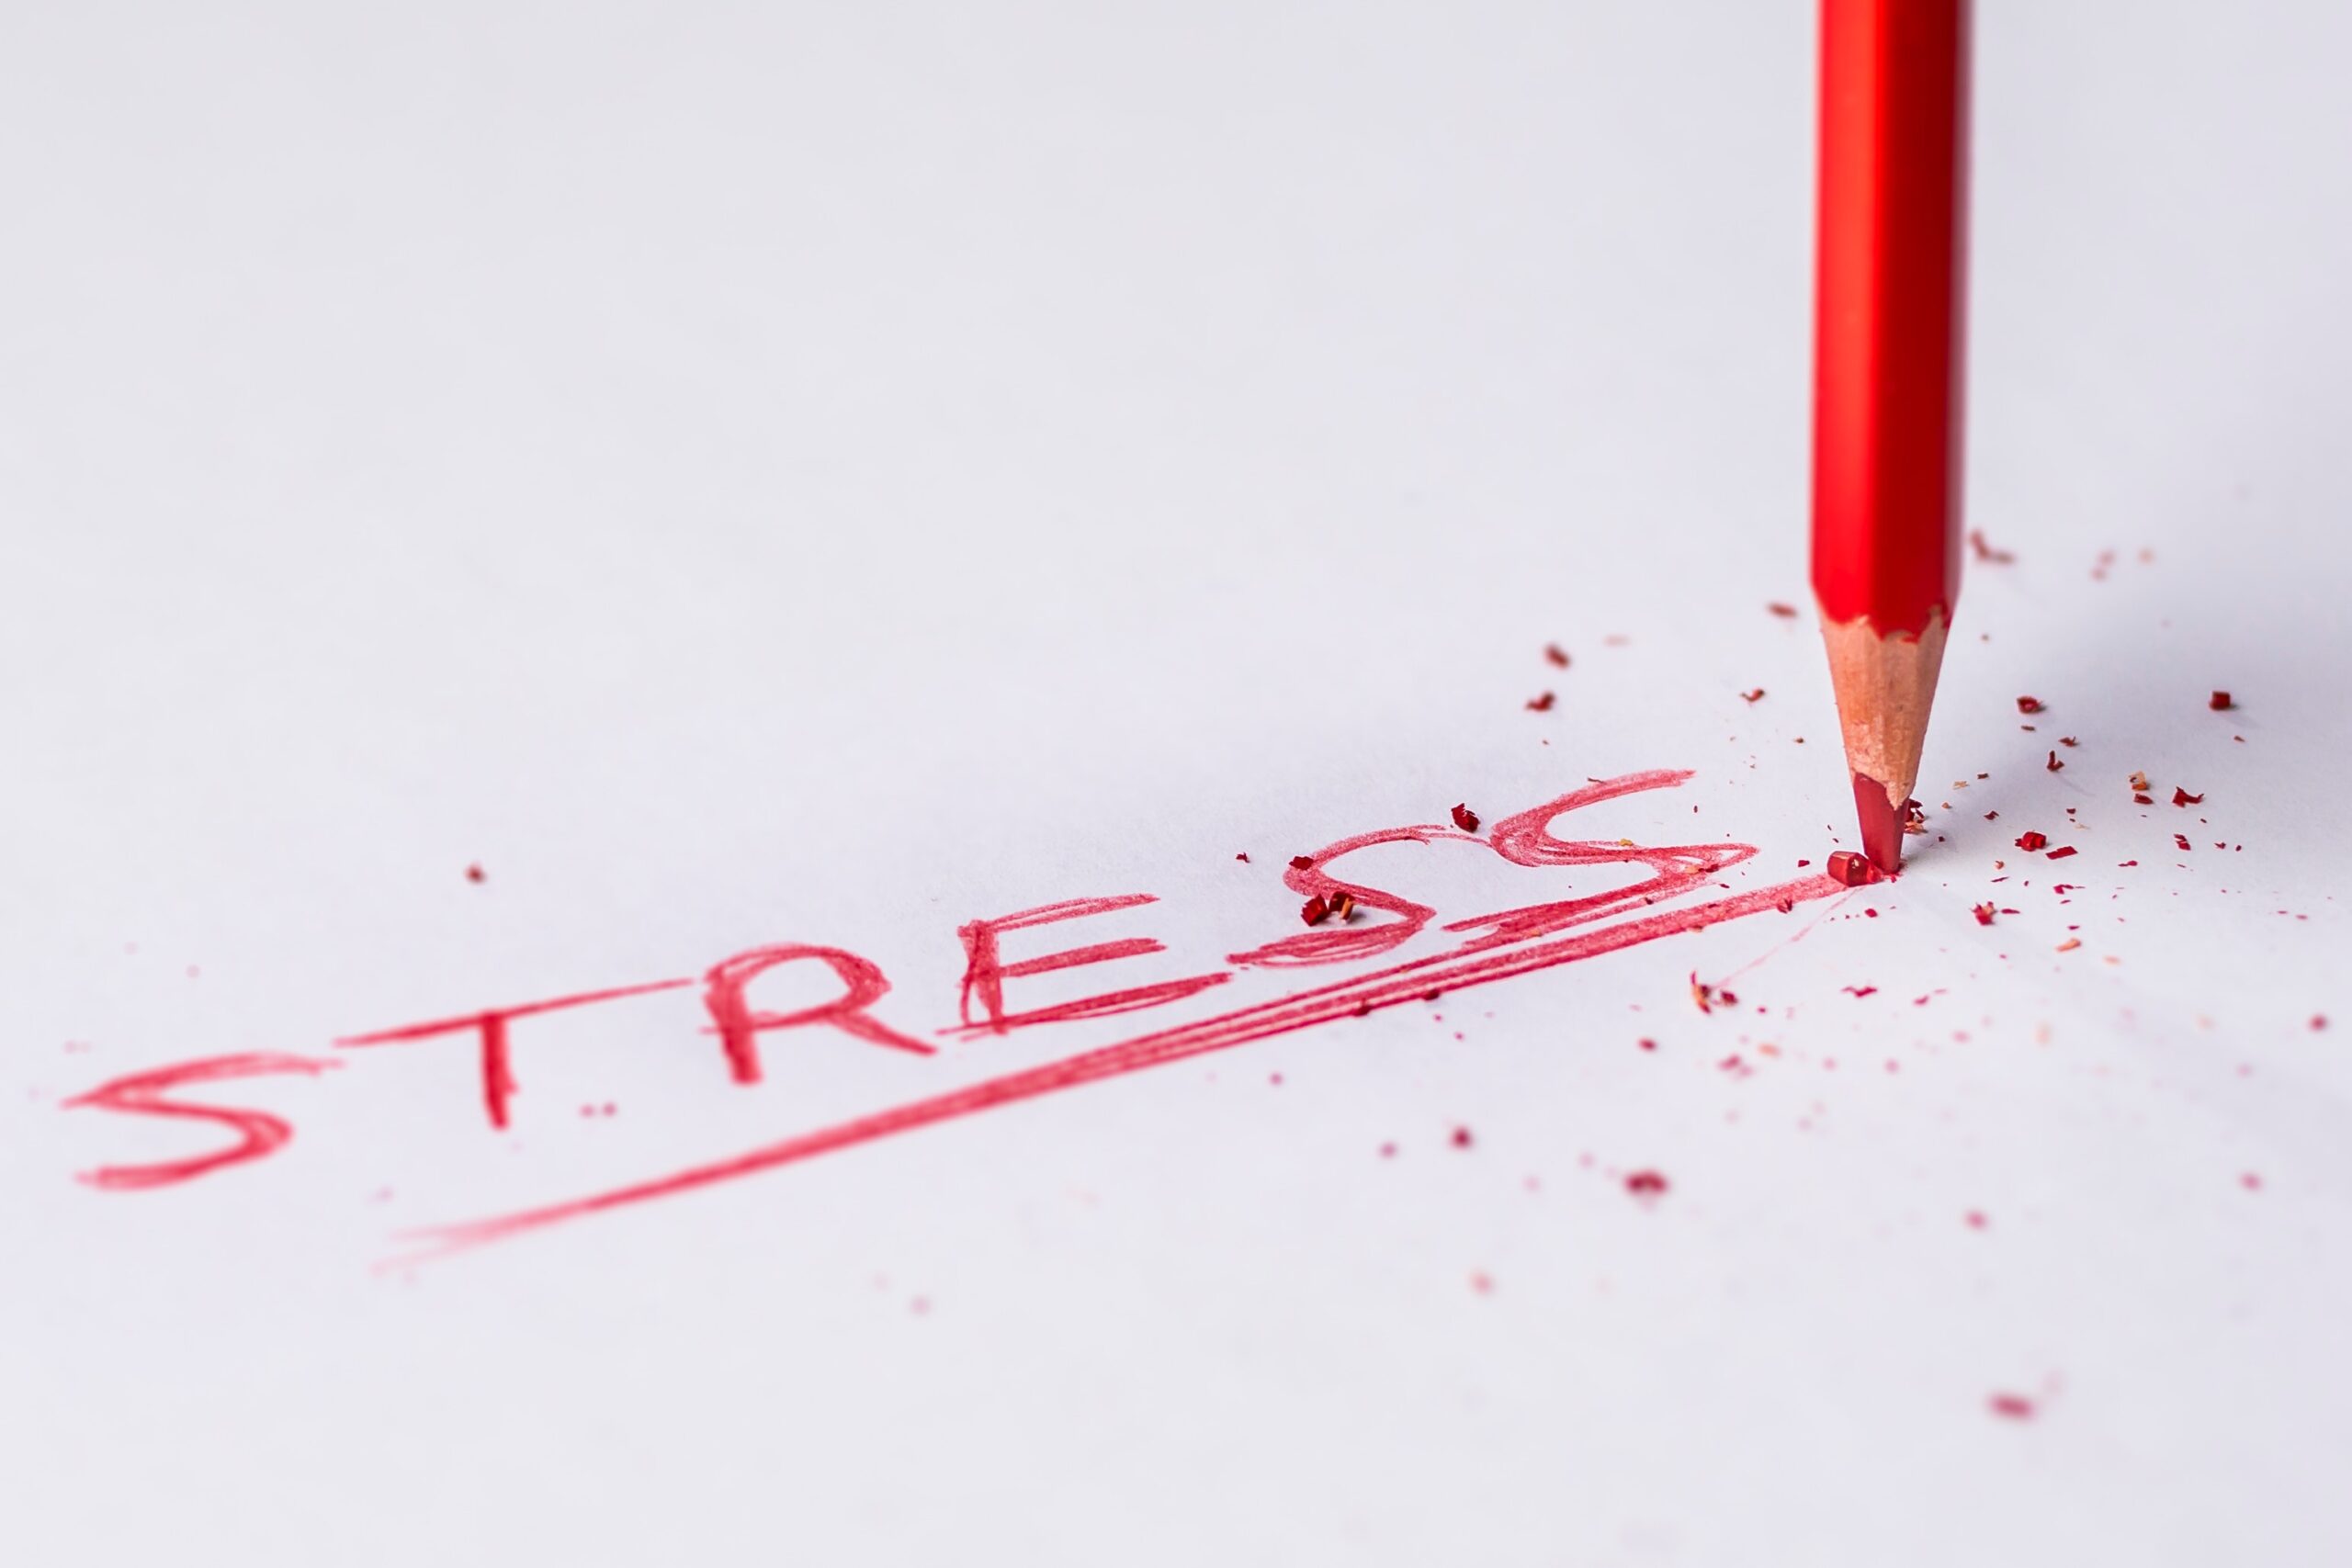 the word stress written out in a red colored pencil, with pressure being applied to the pencil causing the tip to break